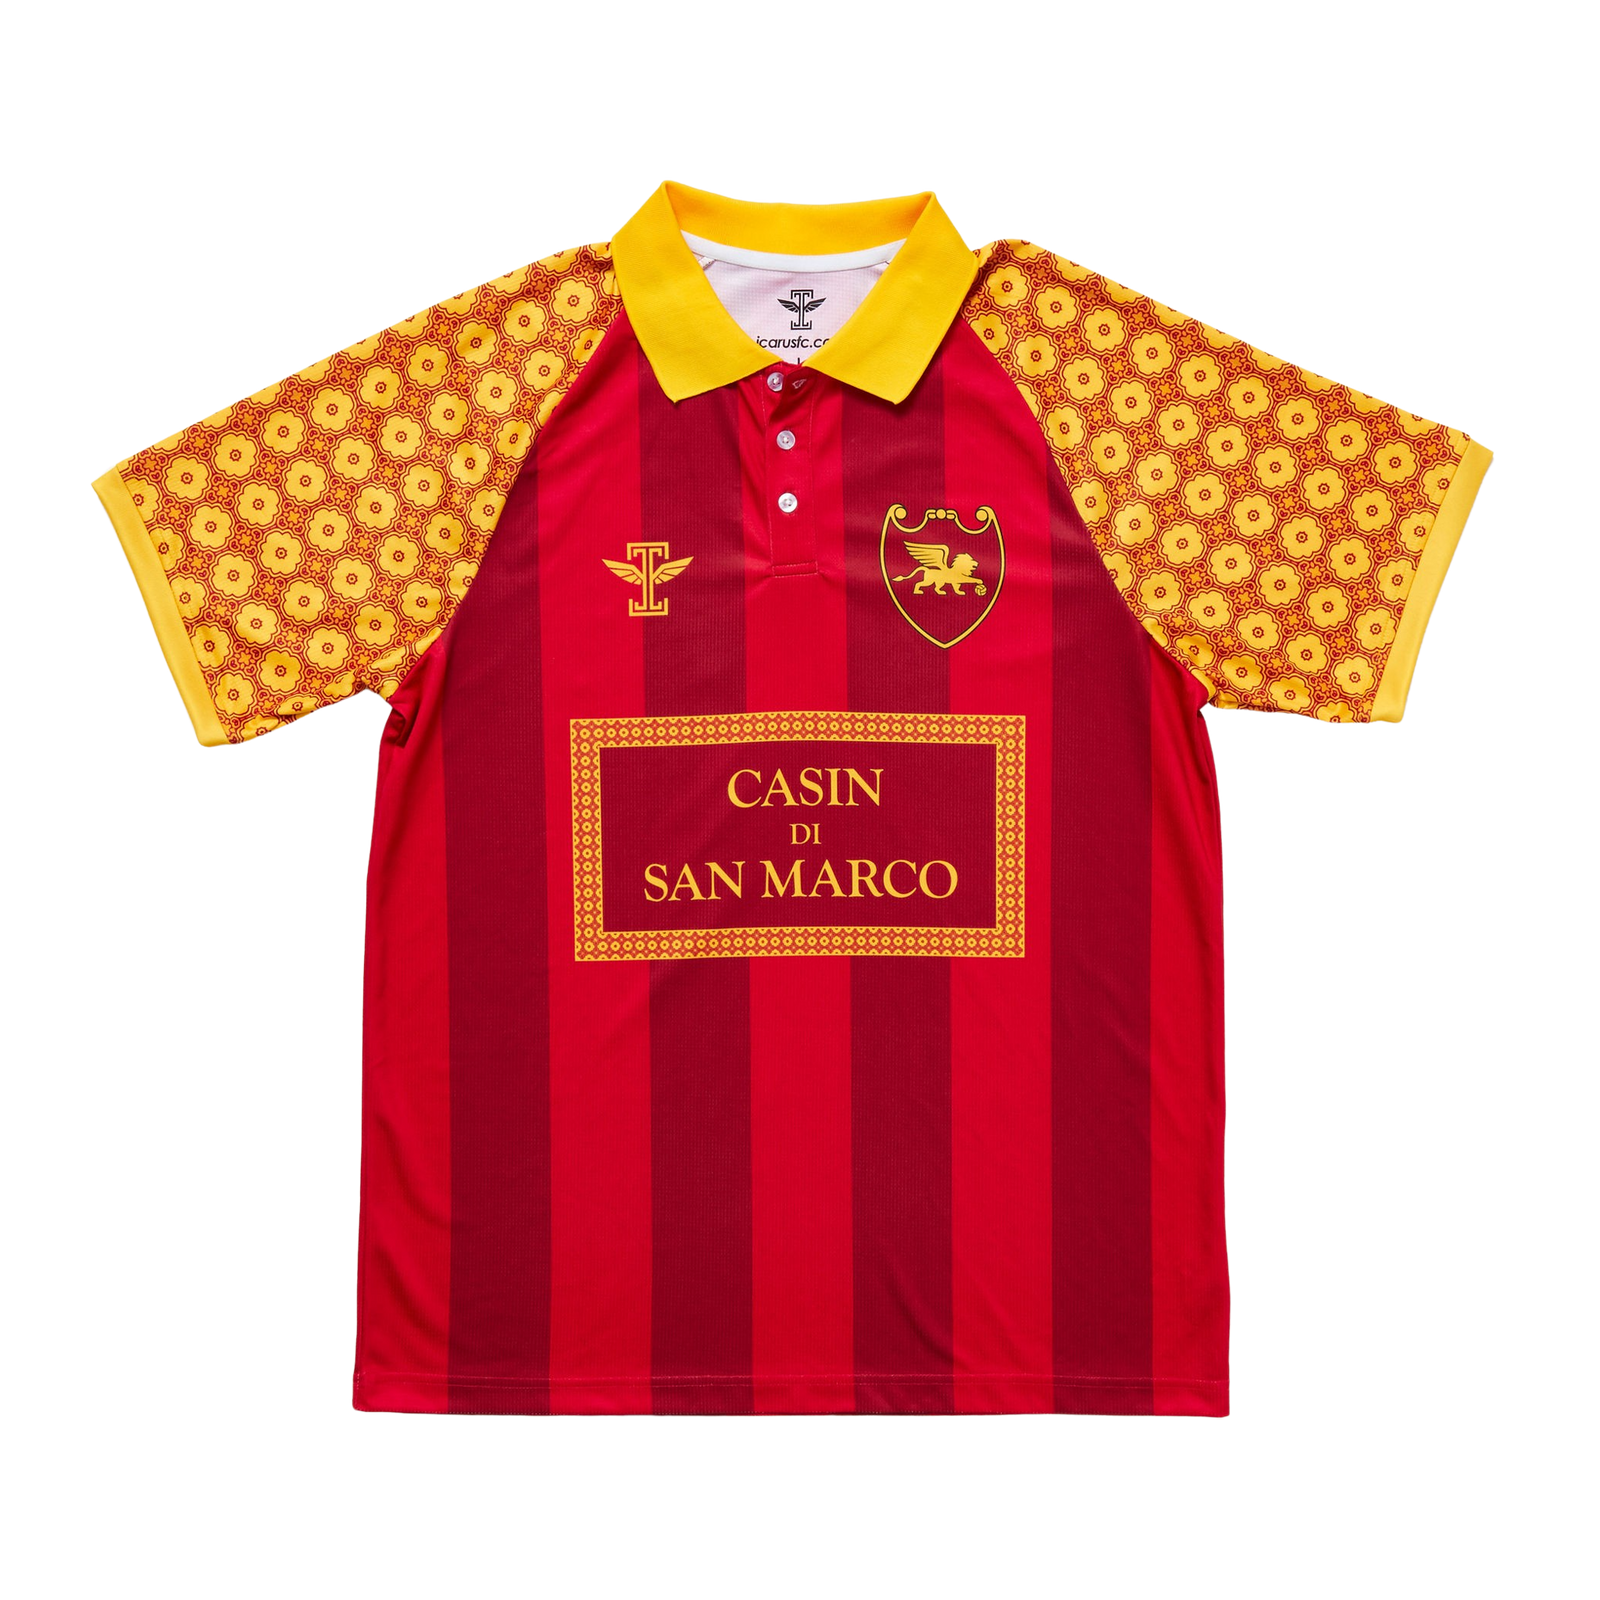 Old Port FC Goalkeeper Jersey - Icarus Football